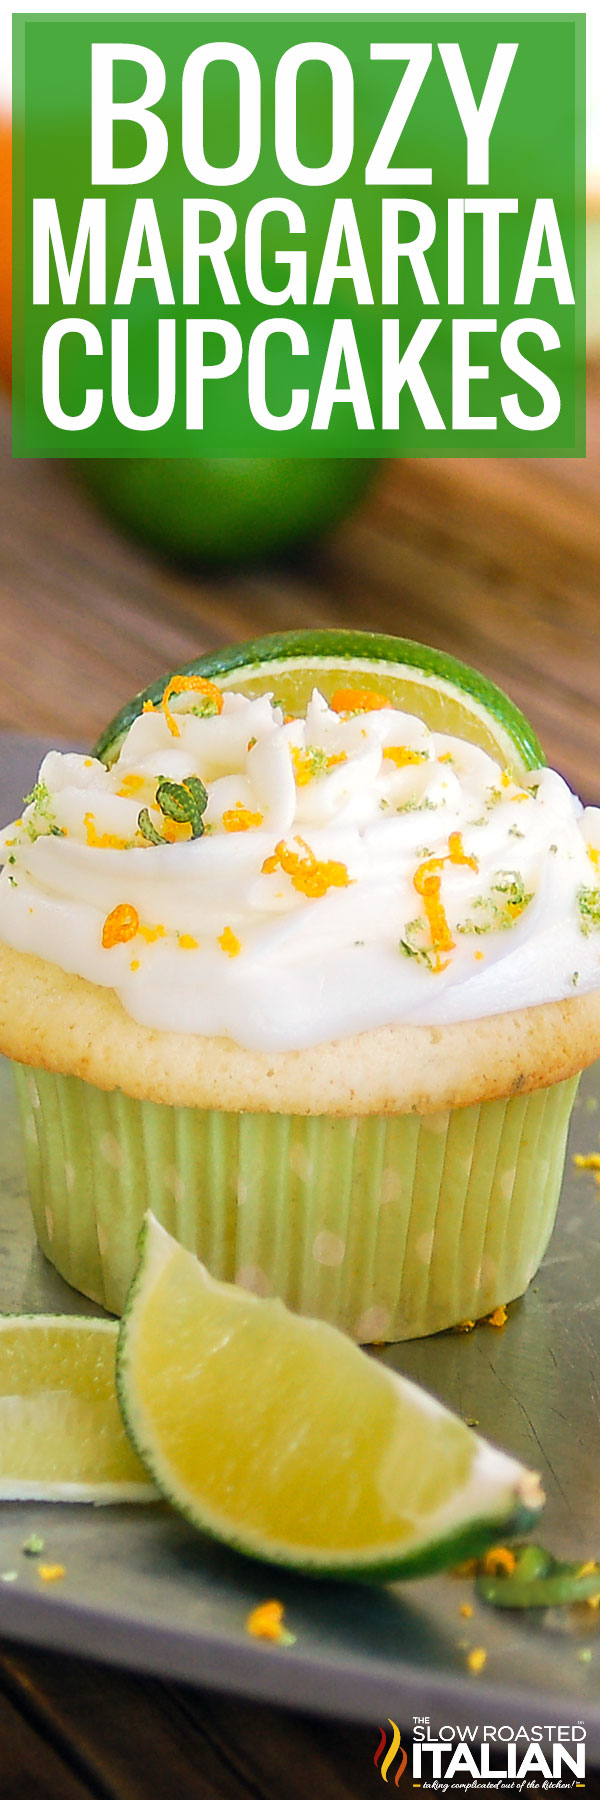 titled image (and shown): boozy margarita cupcakes